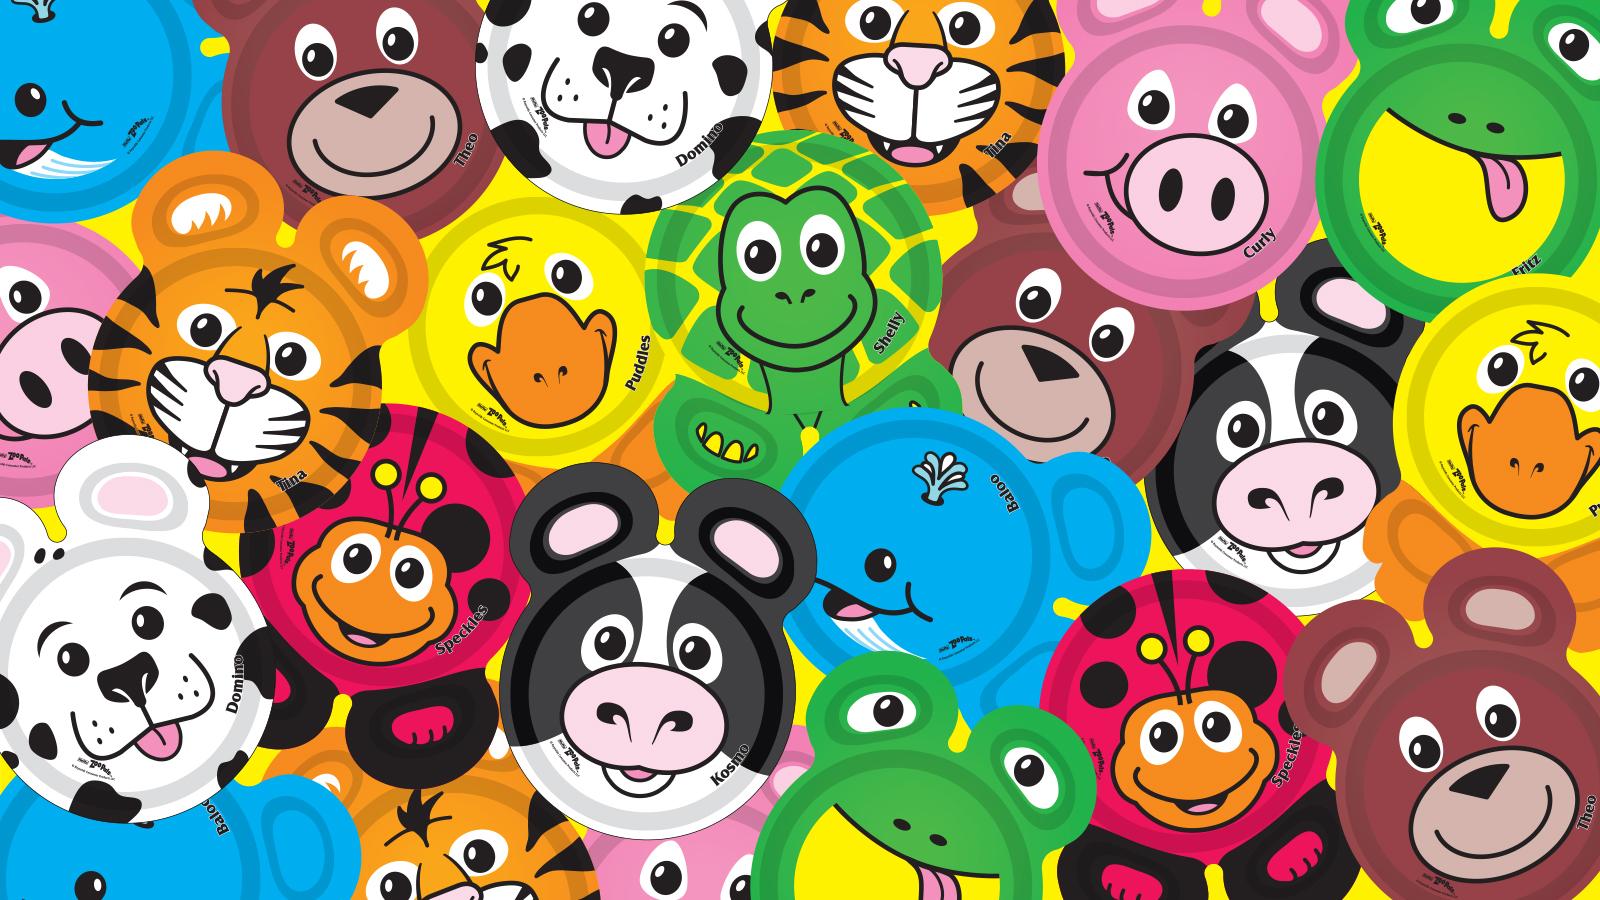 Hefty Zoo Pals Party Edition Paper Plates for Kids, Assorted Animal Designs  x 2